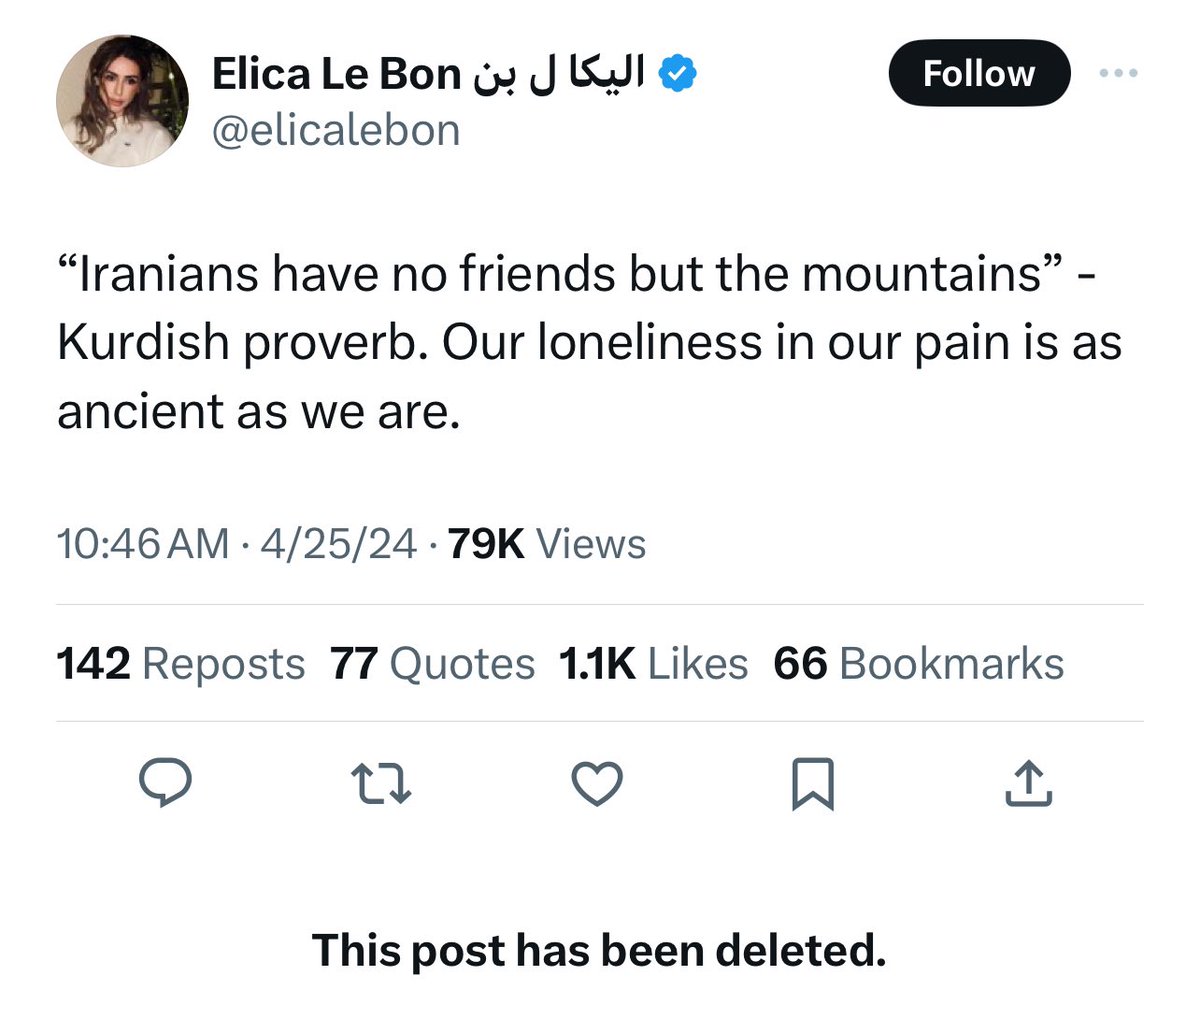 This part of the Iranian diaspora is so ridiculous. They just make stuff up. For instance they add their own flavour to Kurdish proverbs